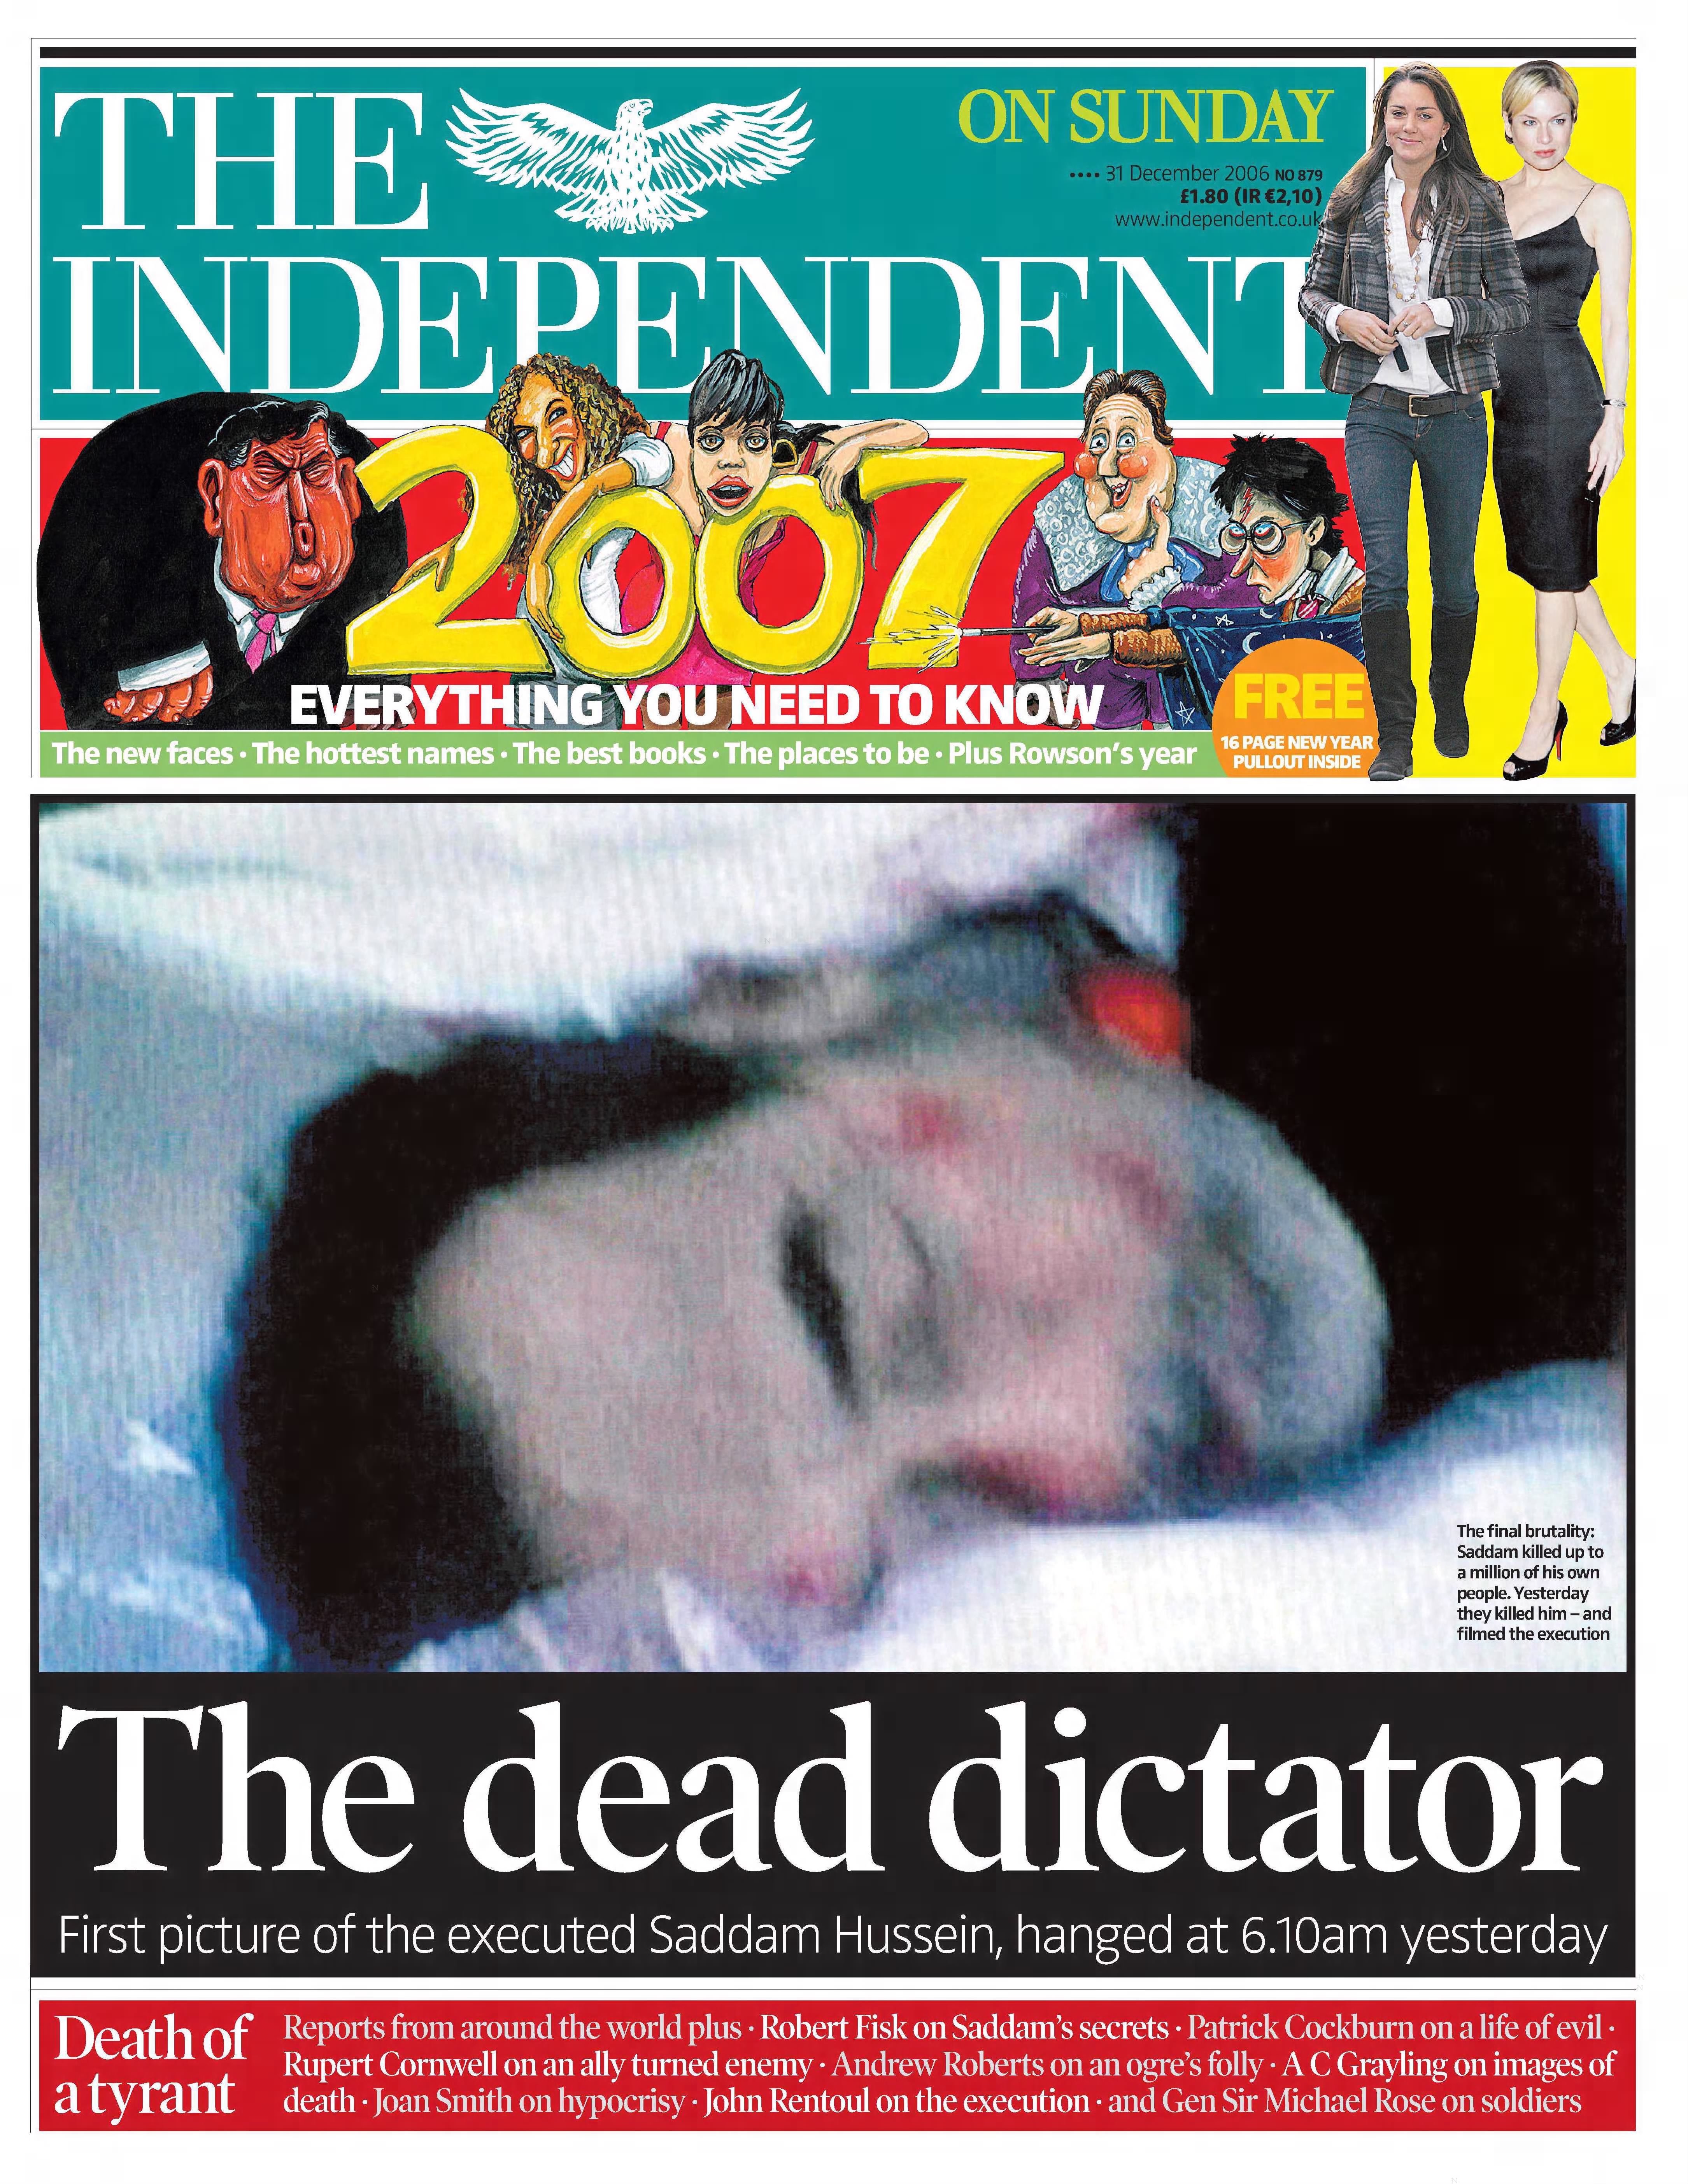 The Independent front page on 31 December 2006